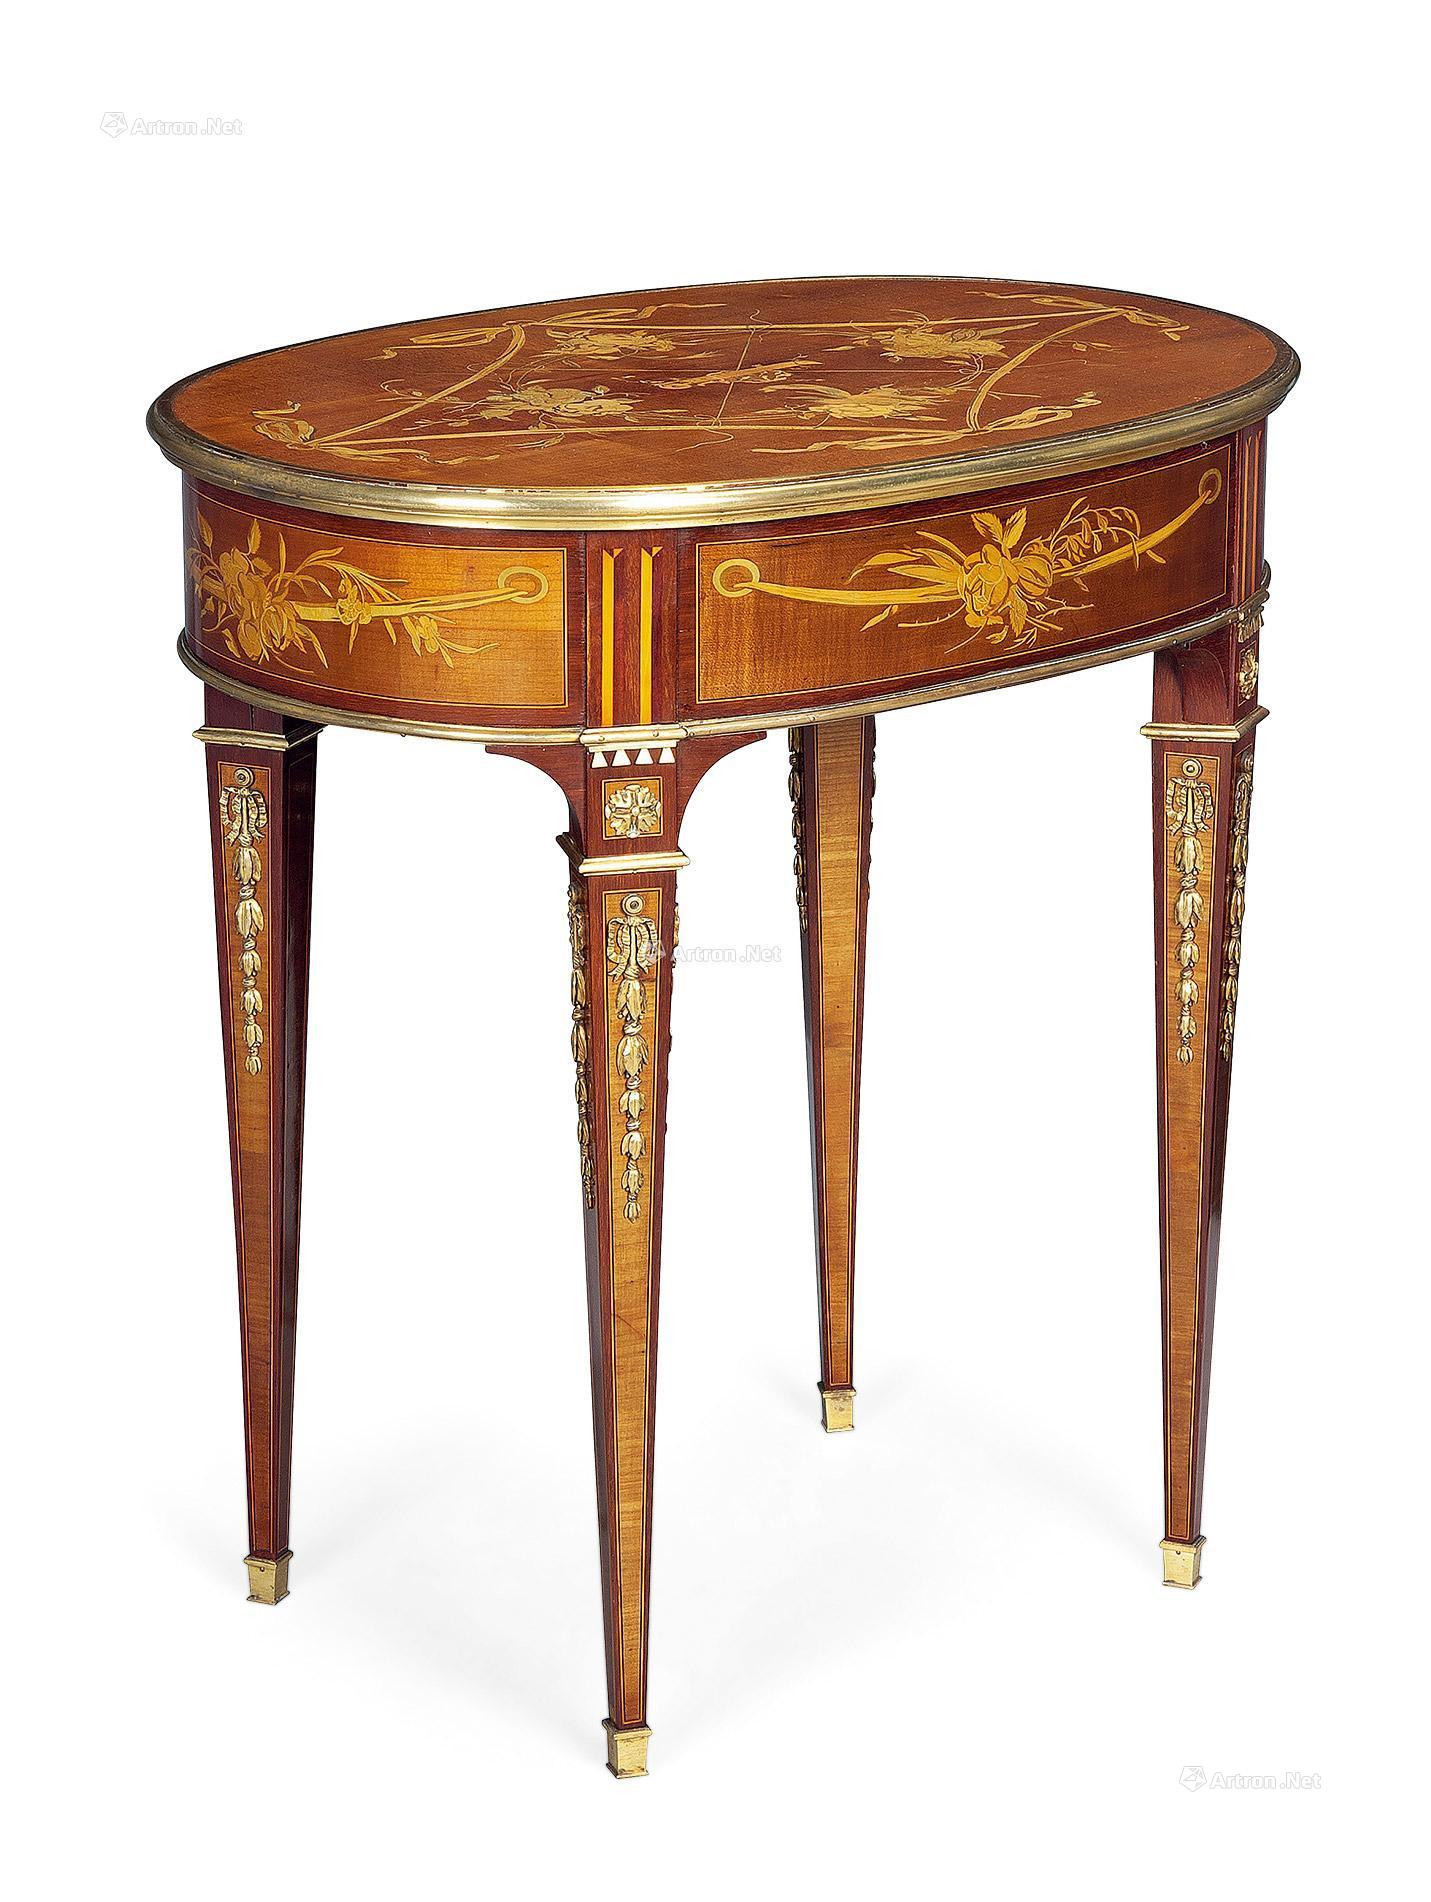 A FRENCH GILT BRONZE AND MARQUETRY GAME TABLE CIRCA LATE 19TH CENTURY